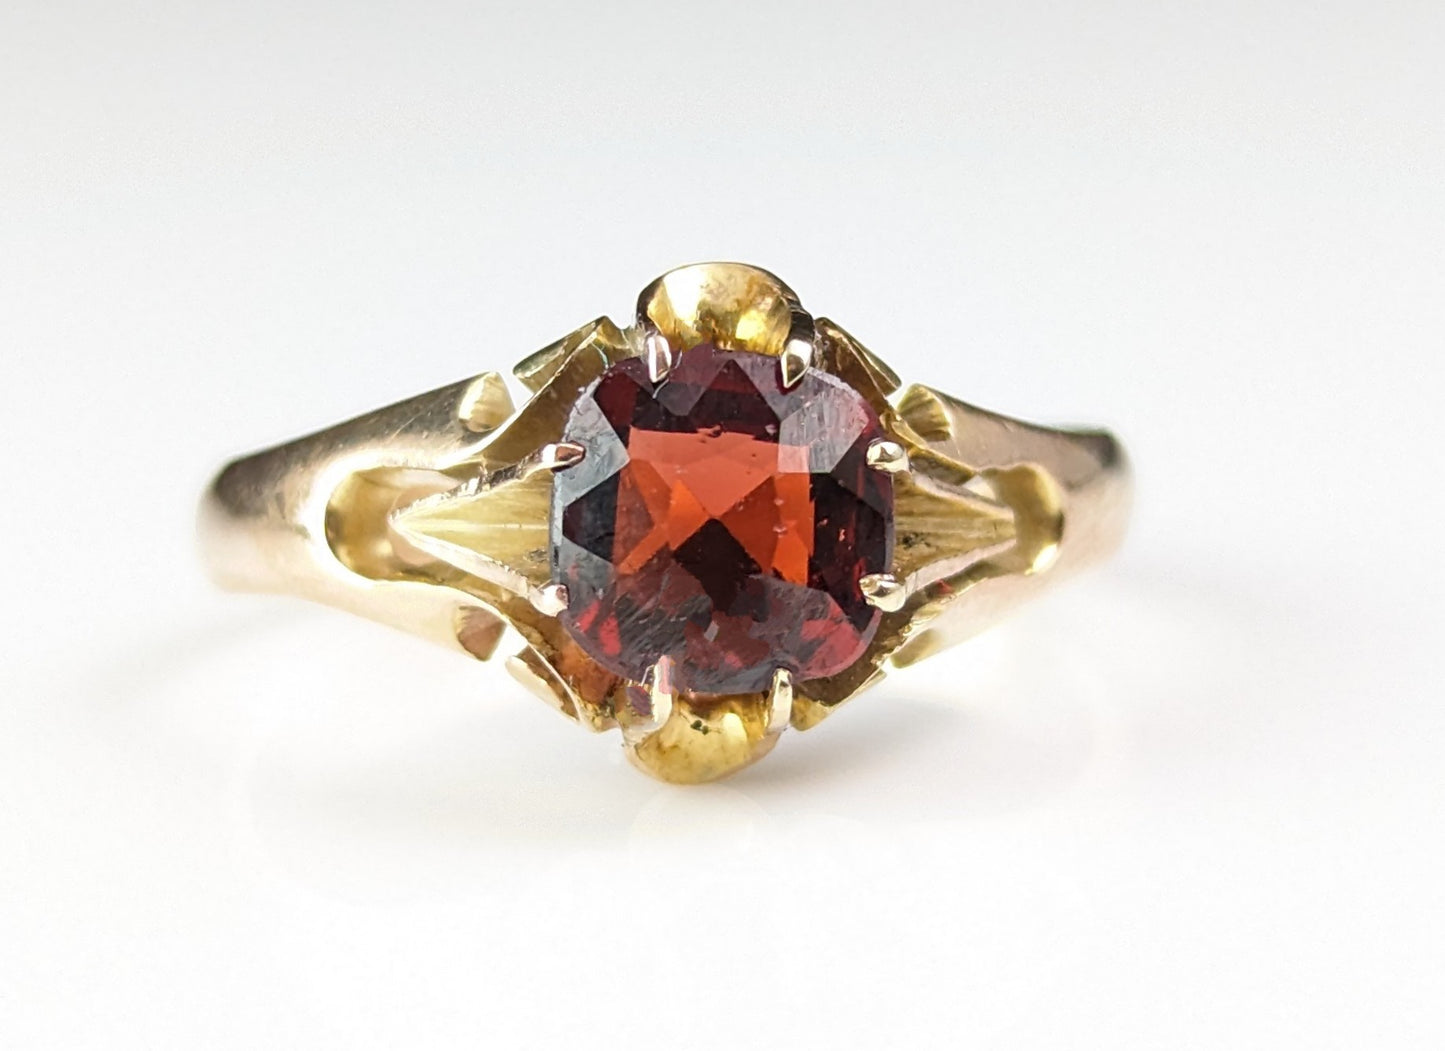 Vintage Garnet solitaire ring, 9ct yellow gold, Art Deco